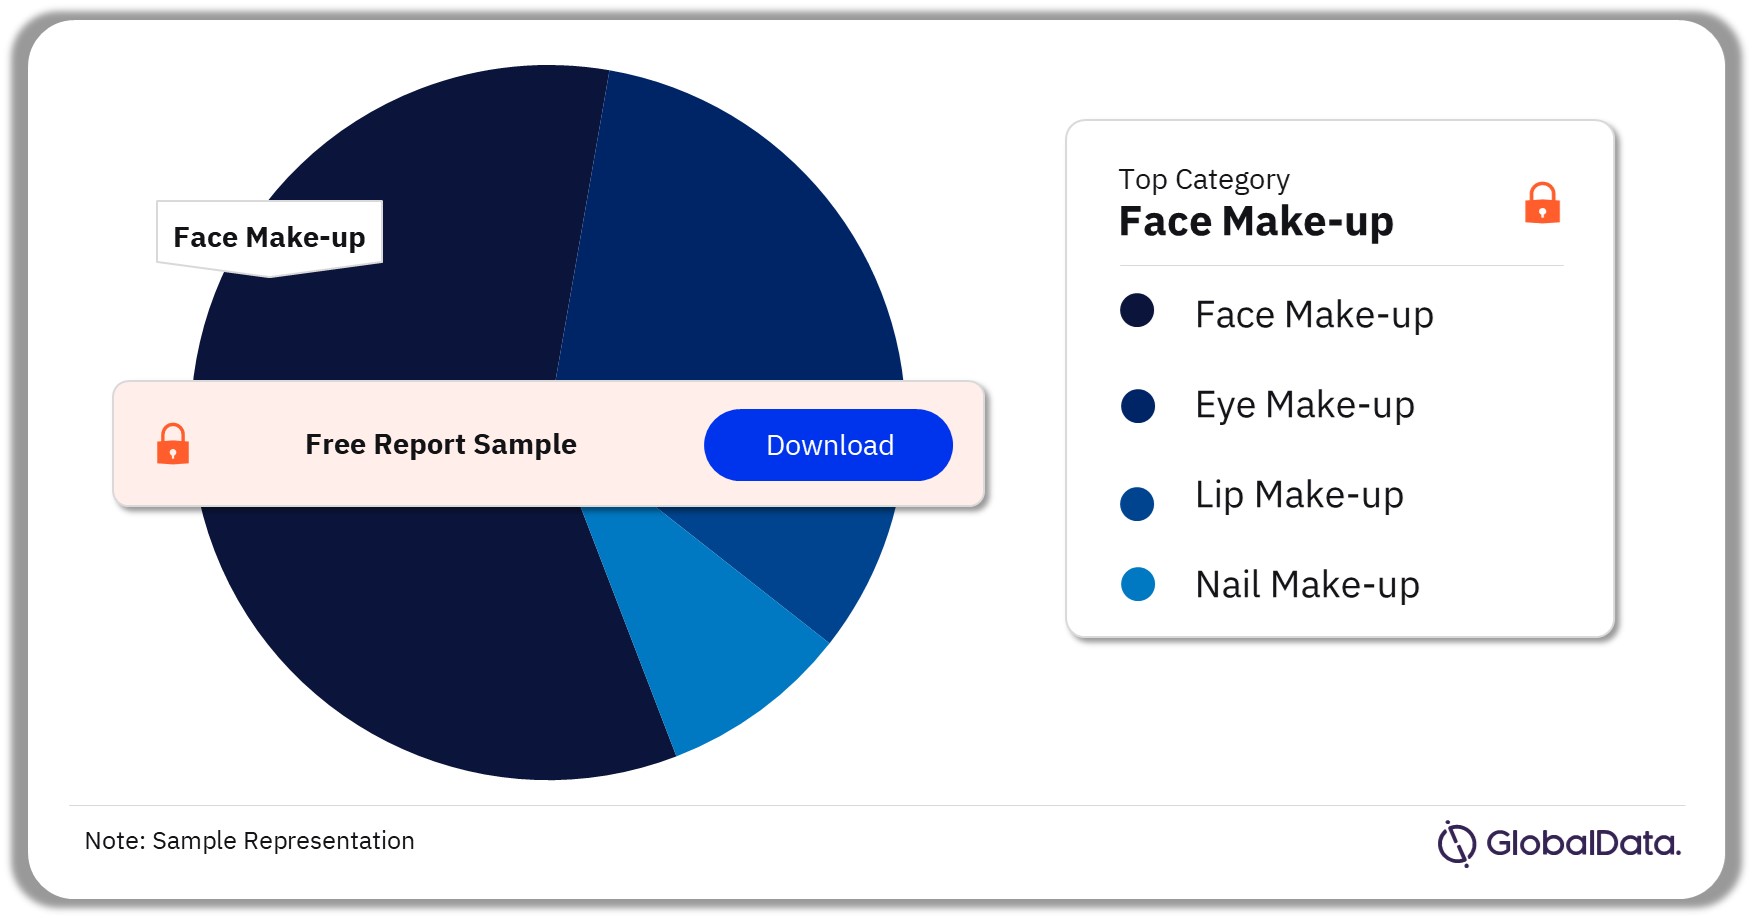 Thailand Make-up Market Analysis by Categories, 2021 (%)